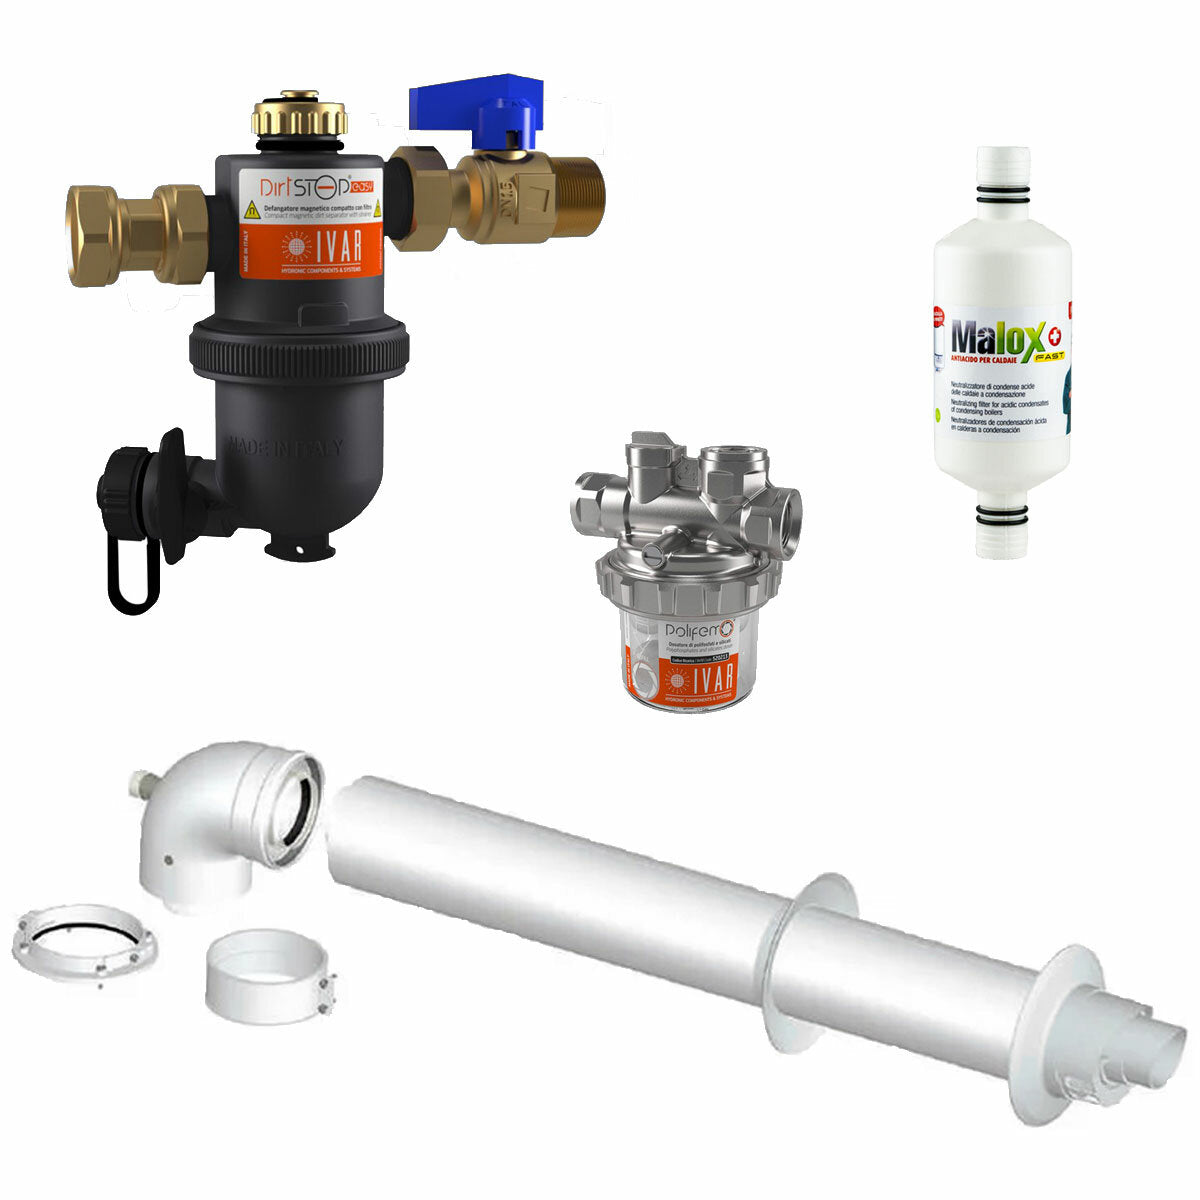 Boiler installation kit with dirt separator - polyphosphate dispenser - condensate neutralizer - universal coaxial fume exhaust